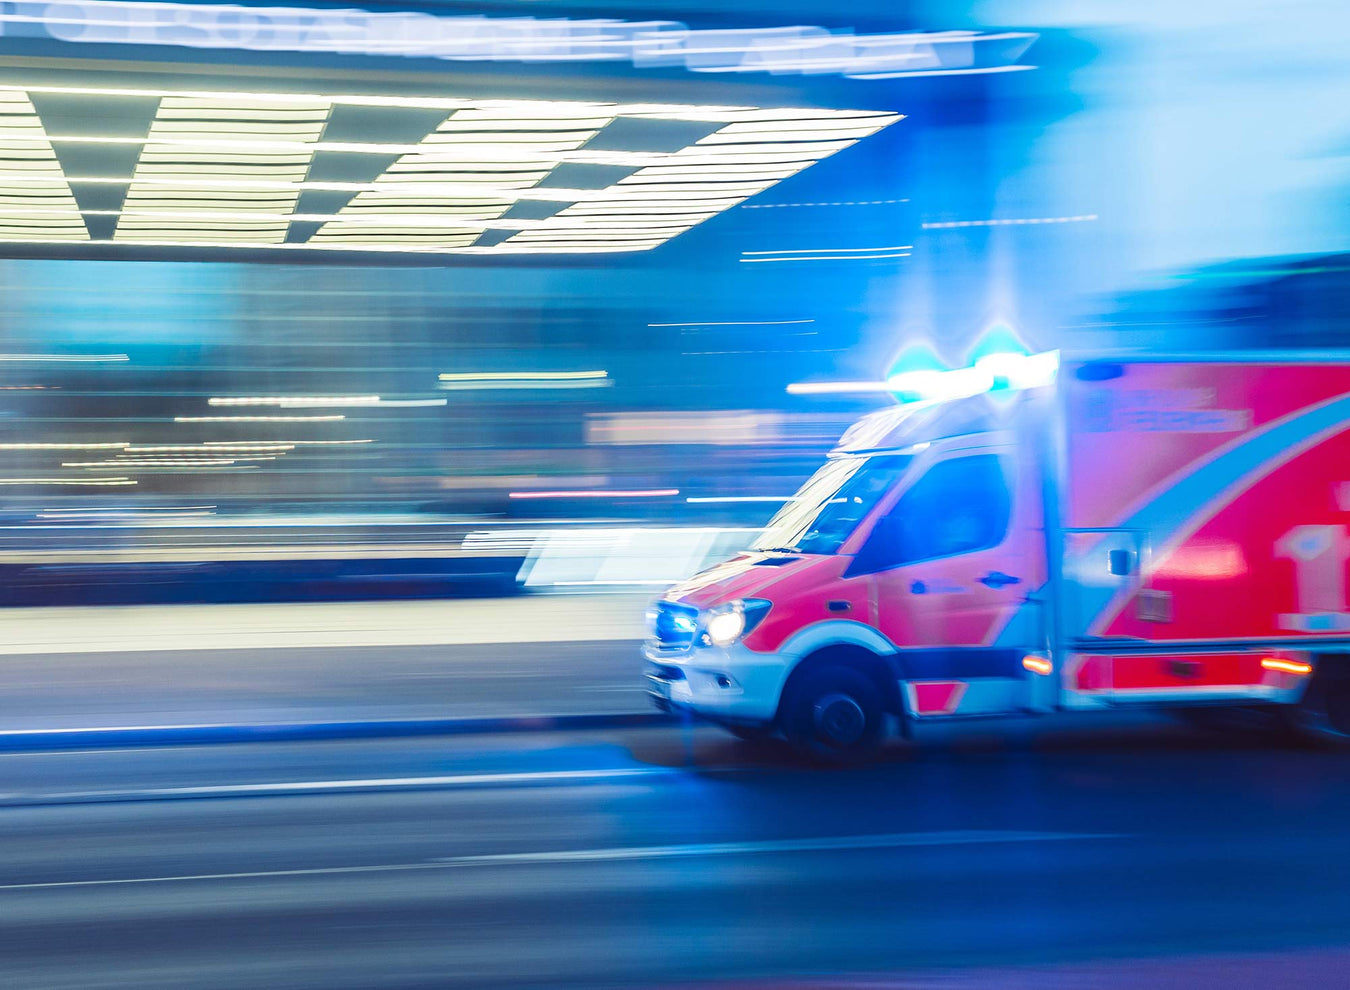 An ambulance moving fast with lights on against a blurred background